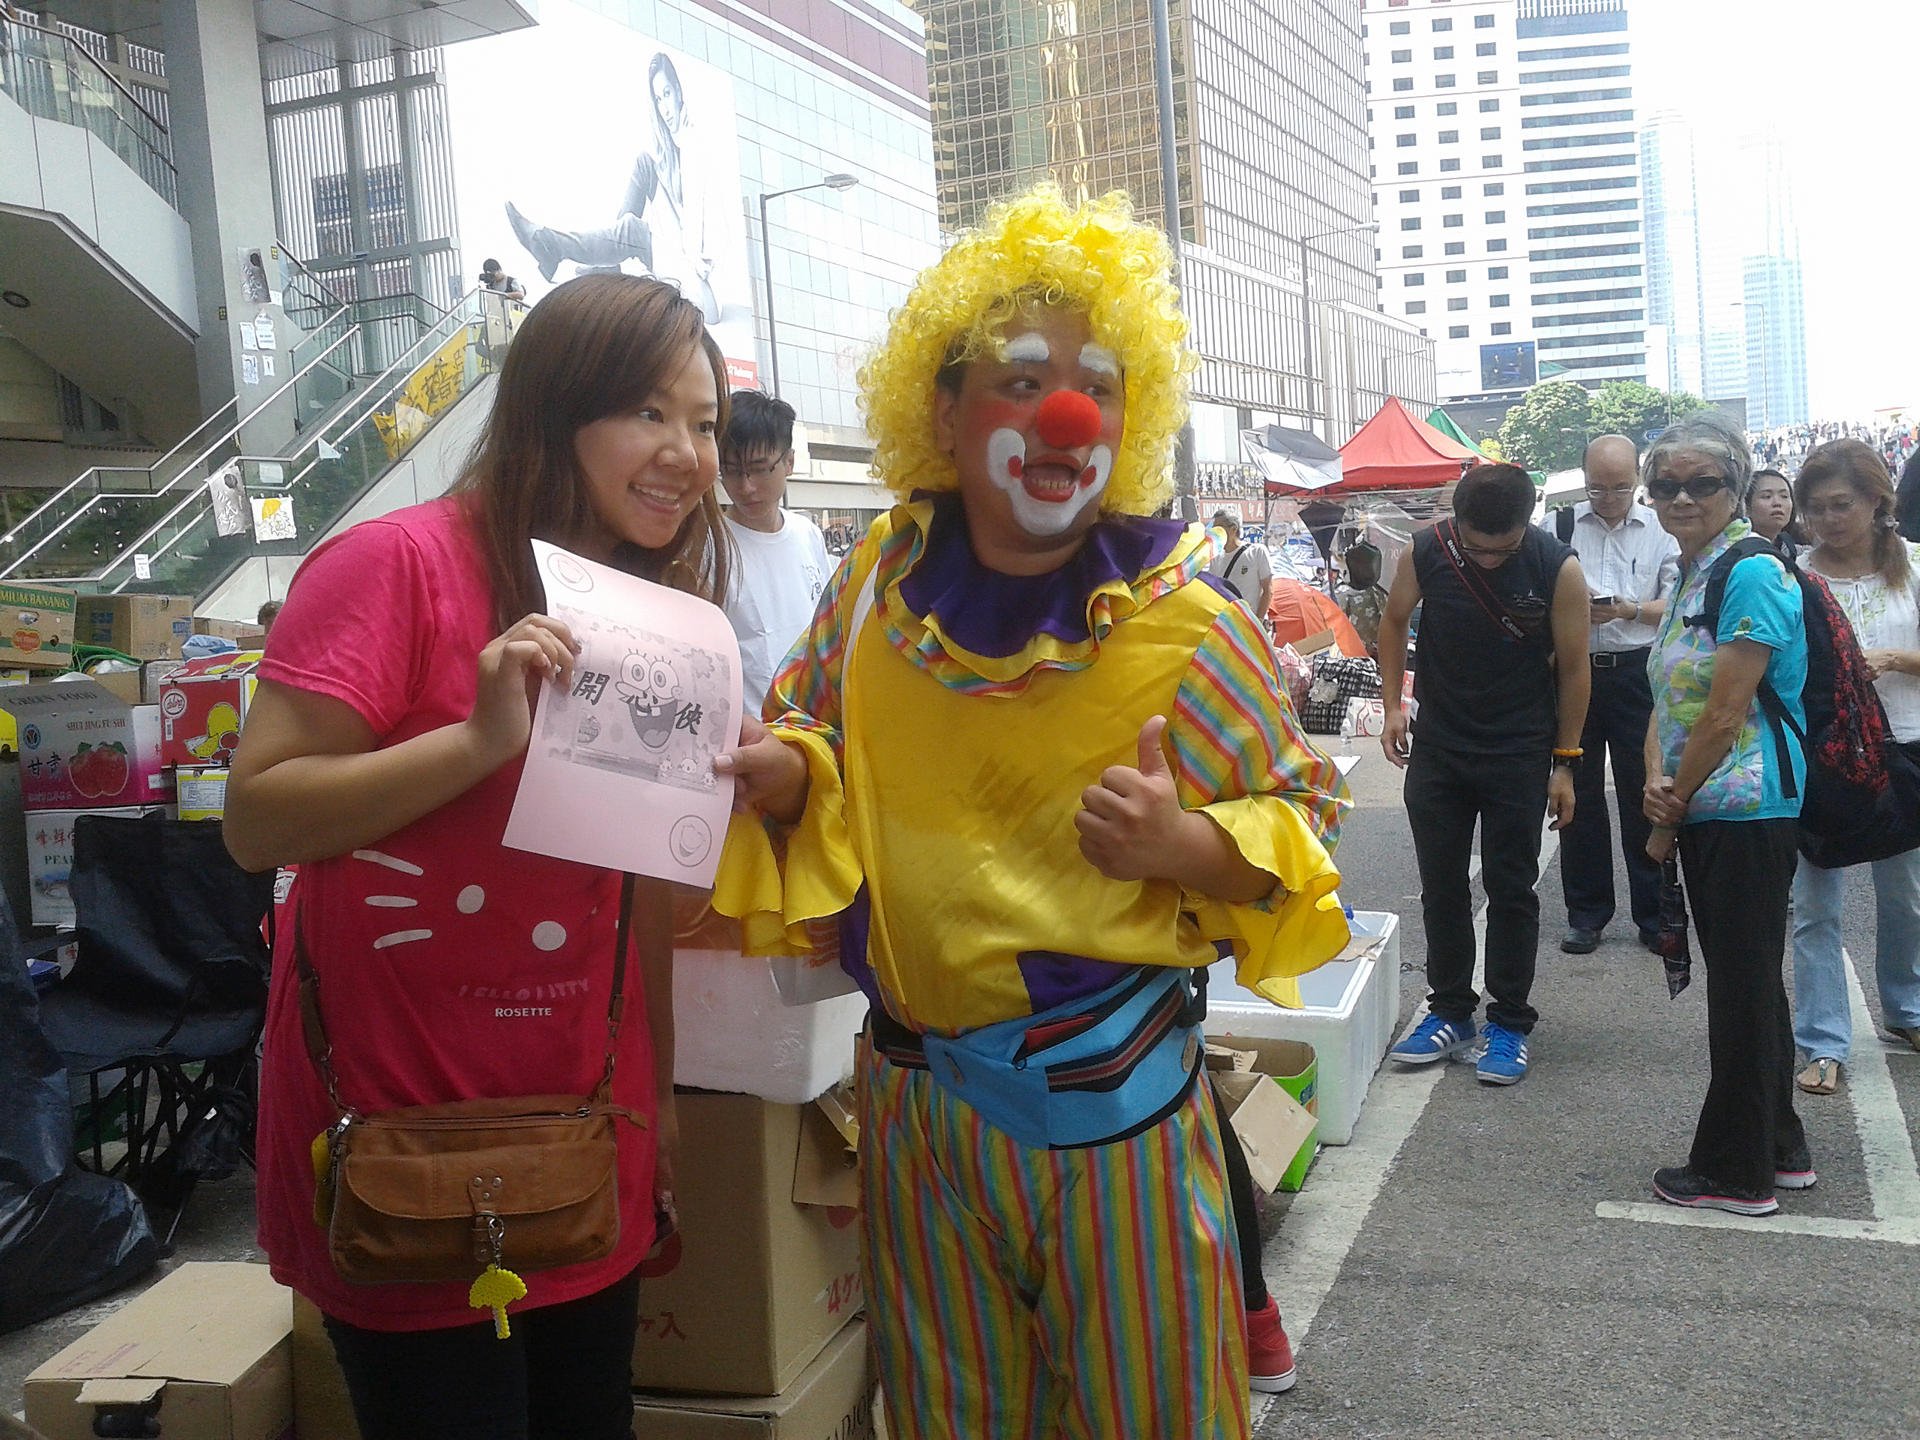 Peter the clown in Admiralty. Photo: Fanny W.Y. Fung